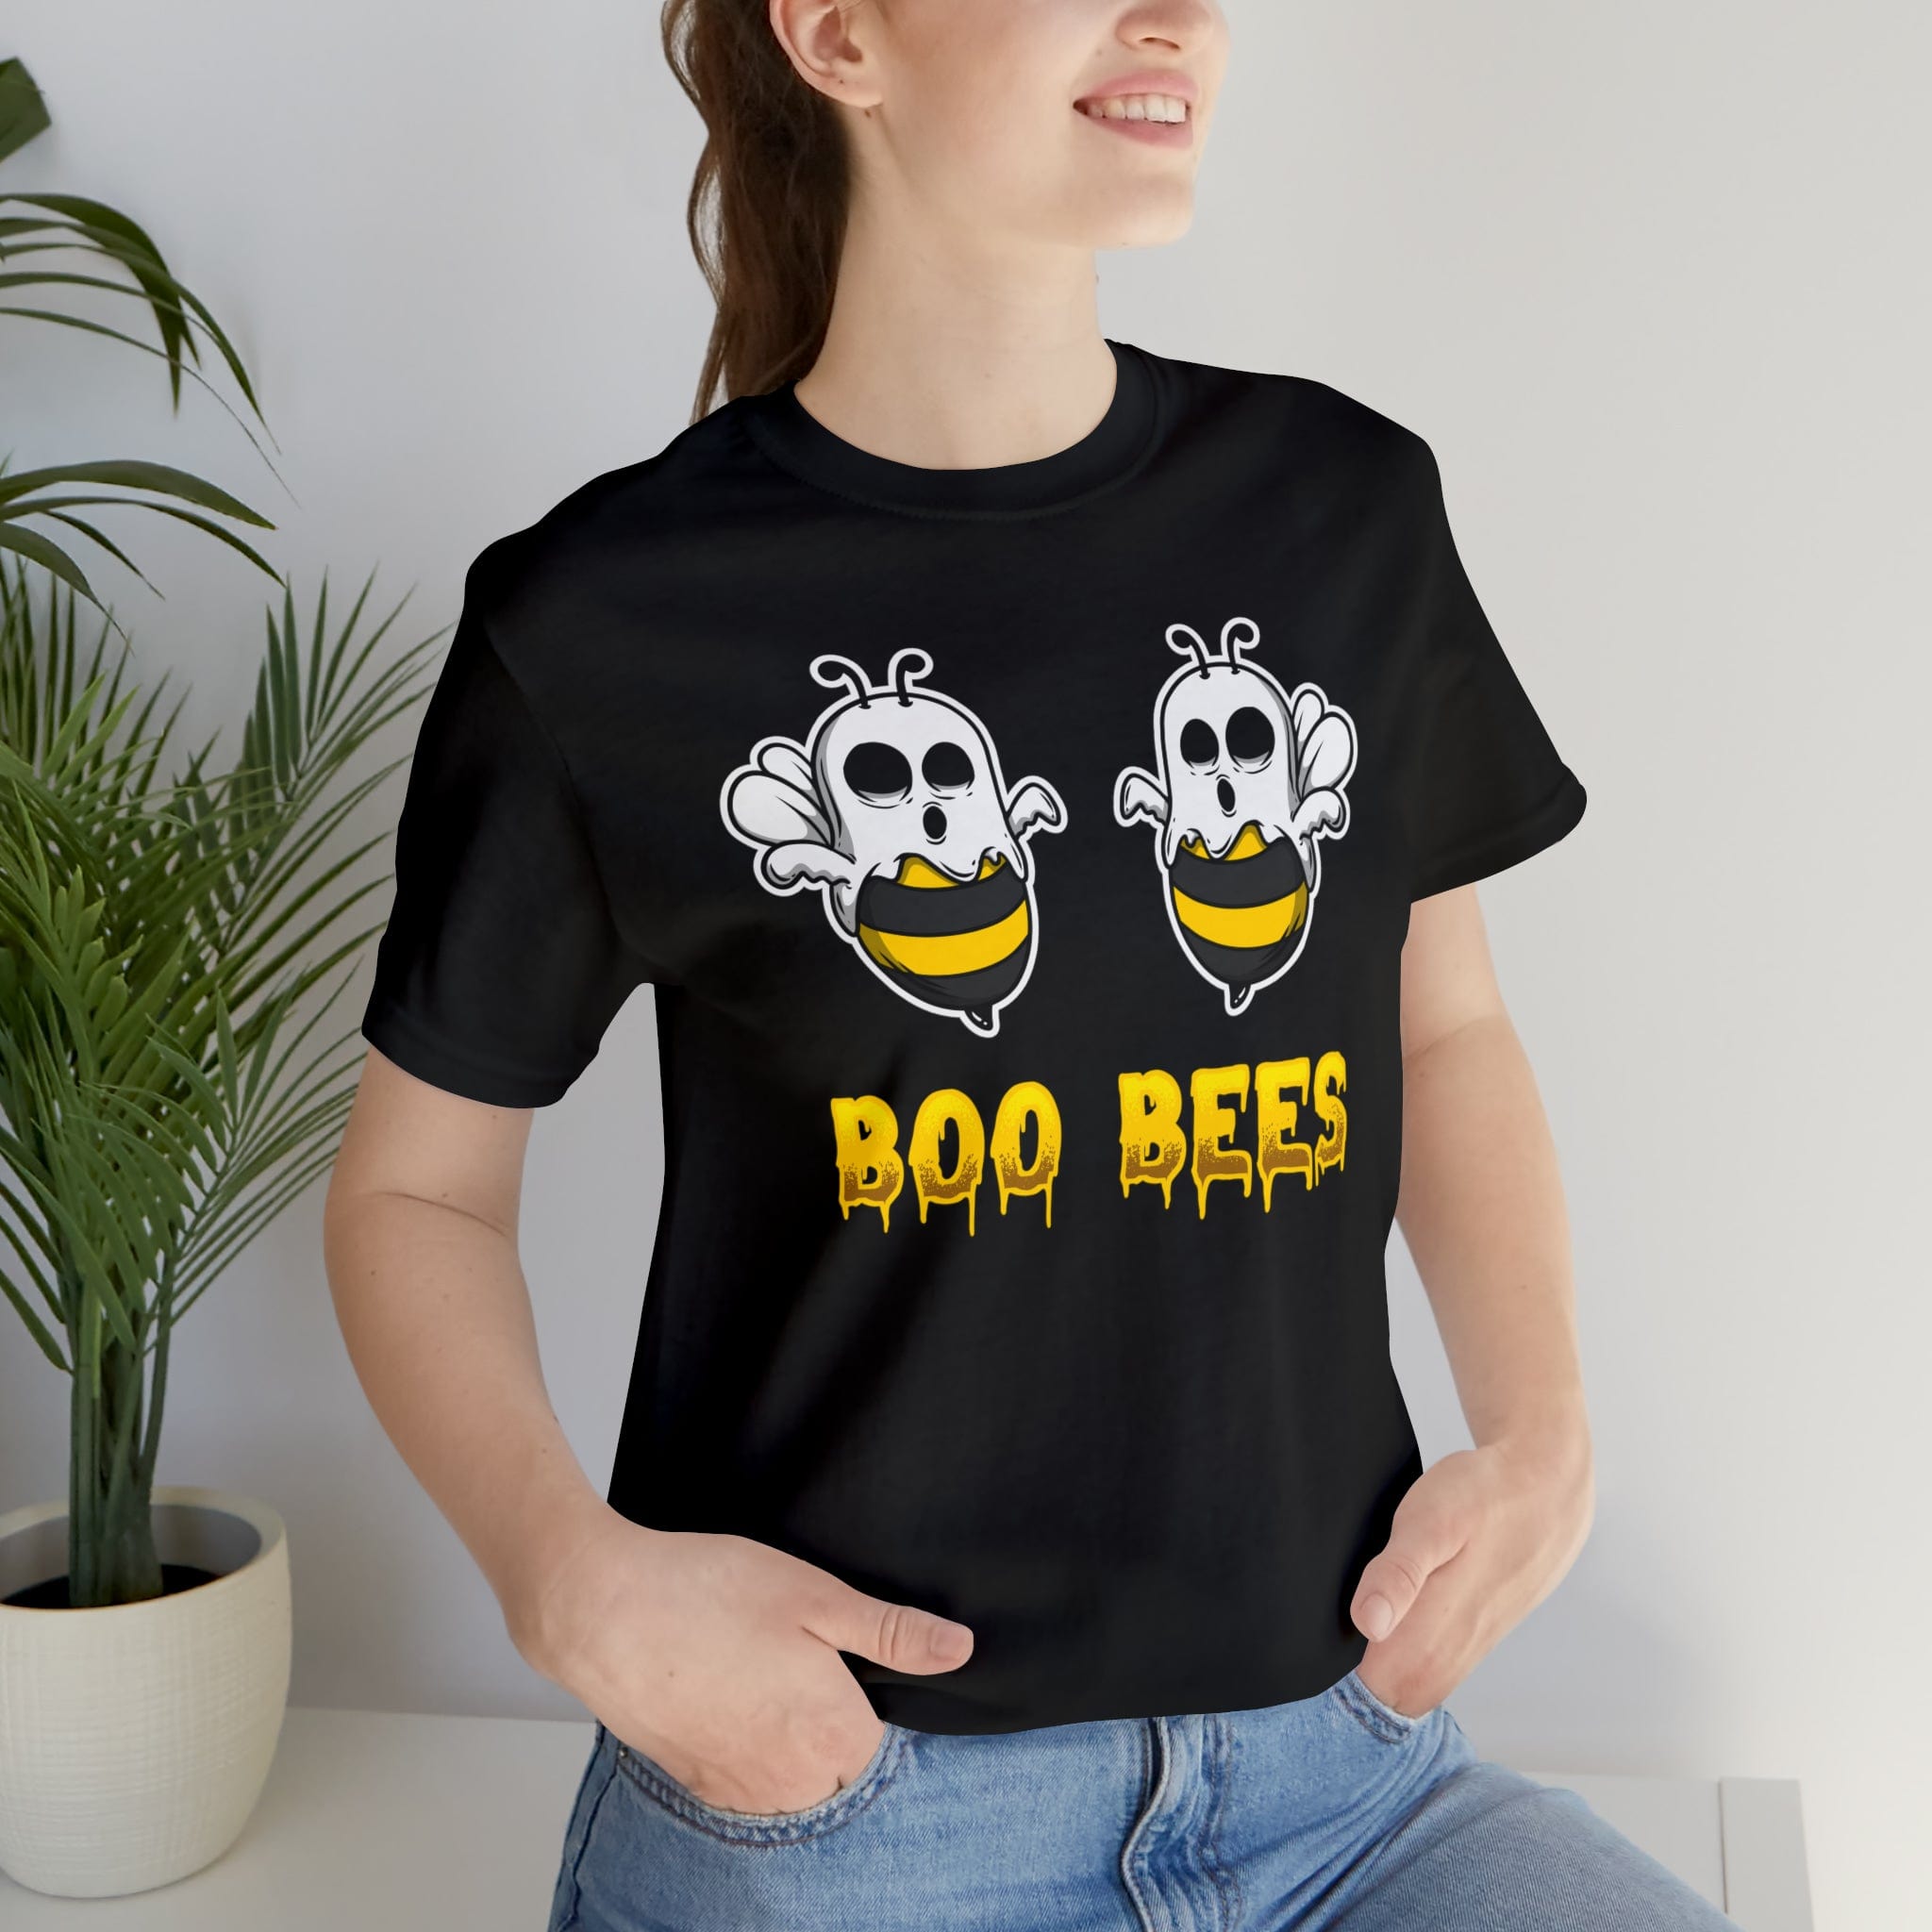 BOO-BEES